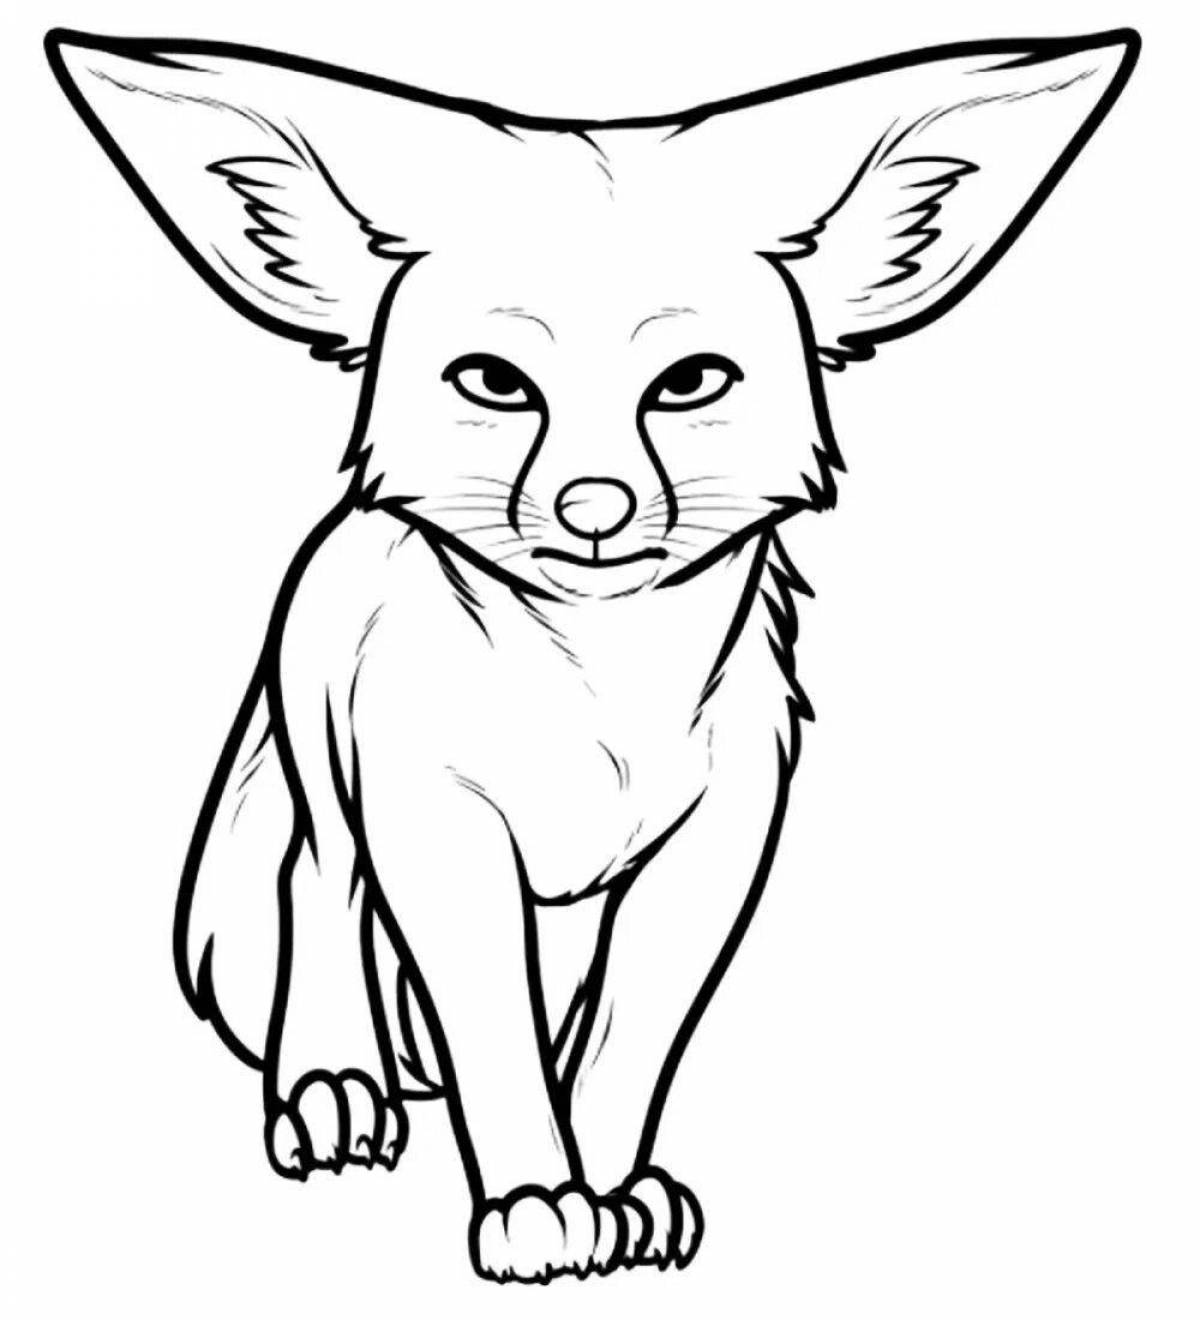 Great realistic fox coloring book